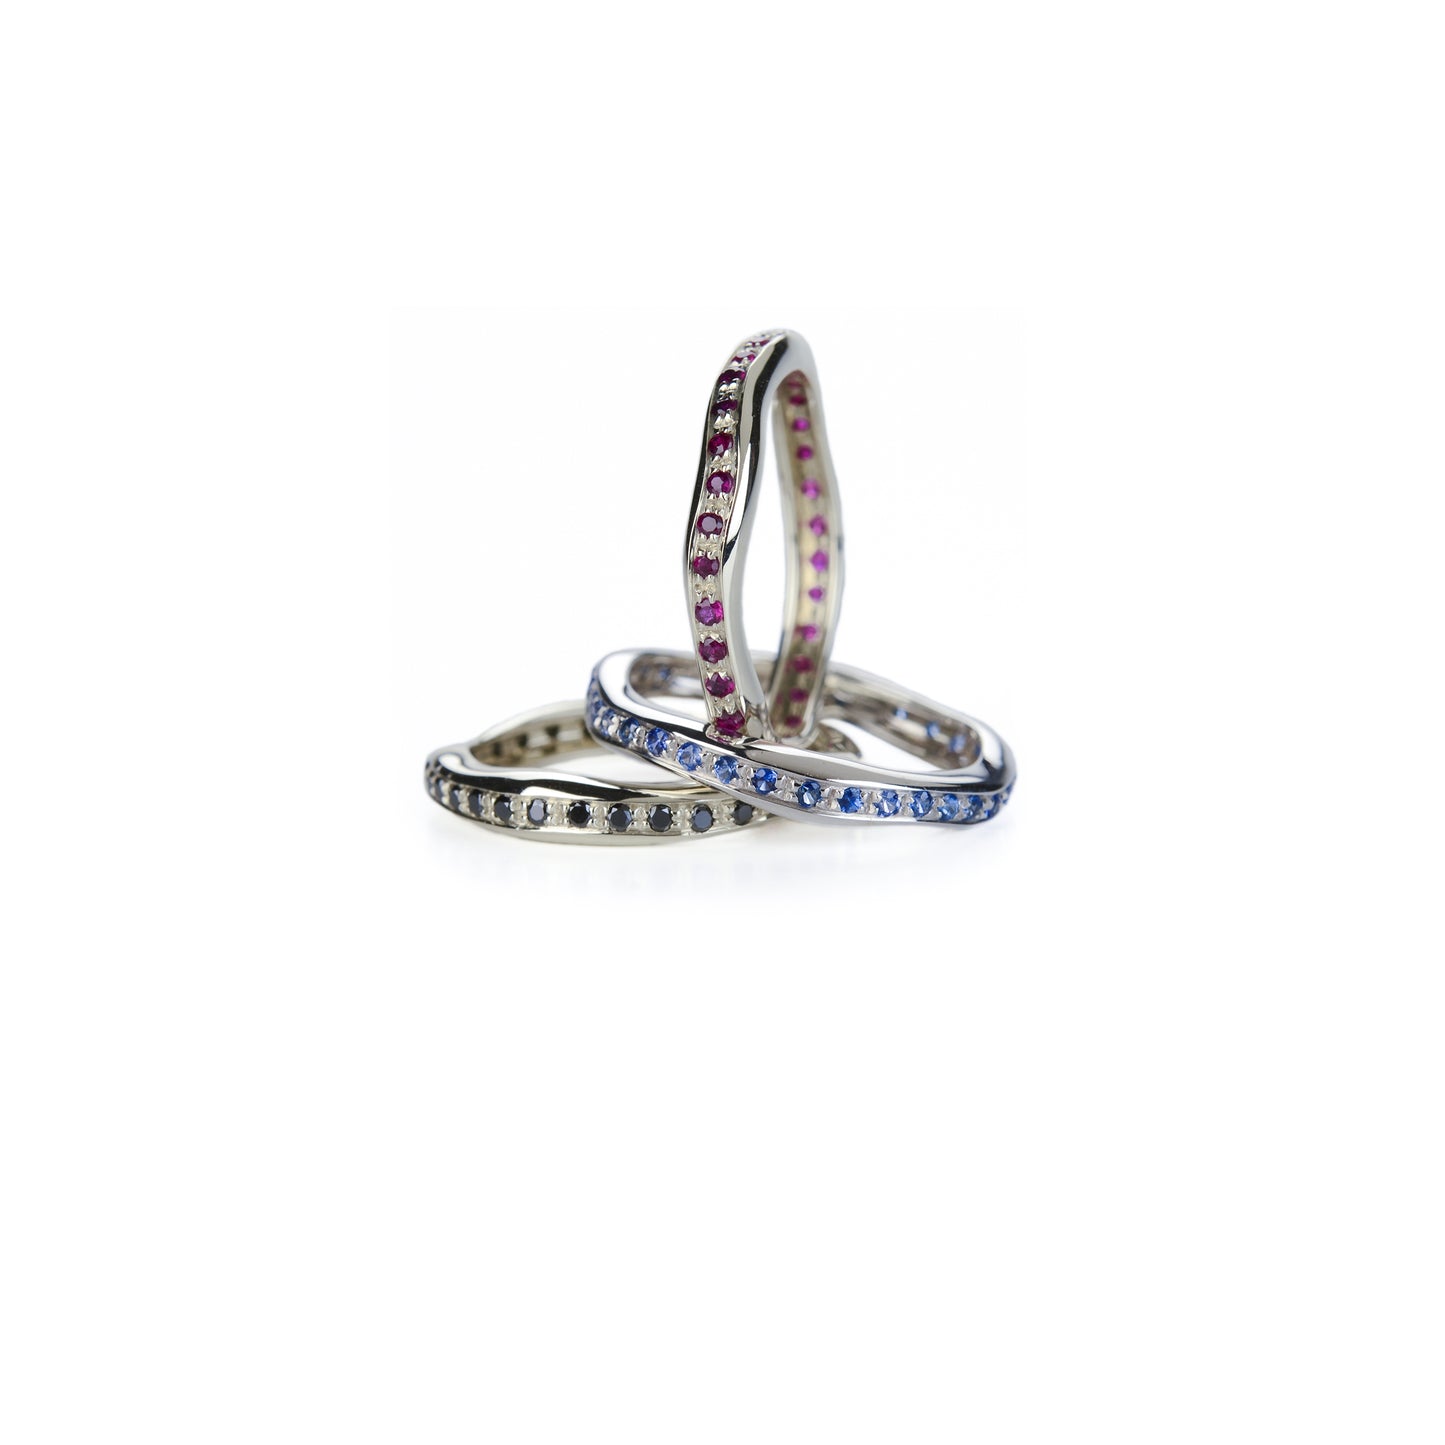 Wavy eternity ring in gold and rubies